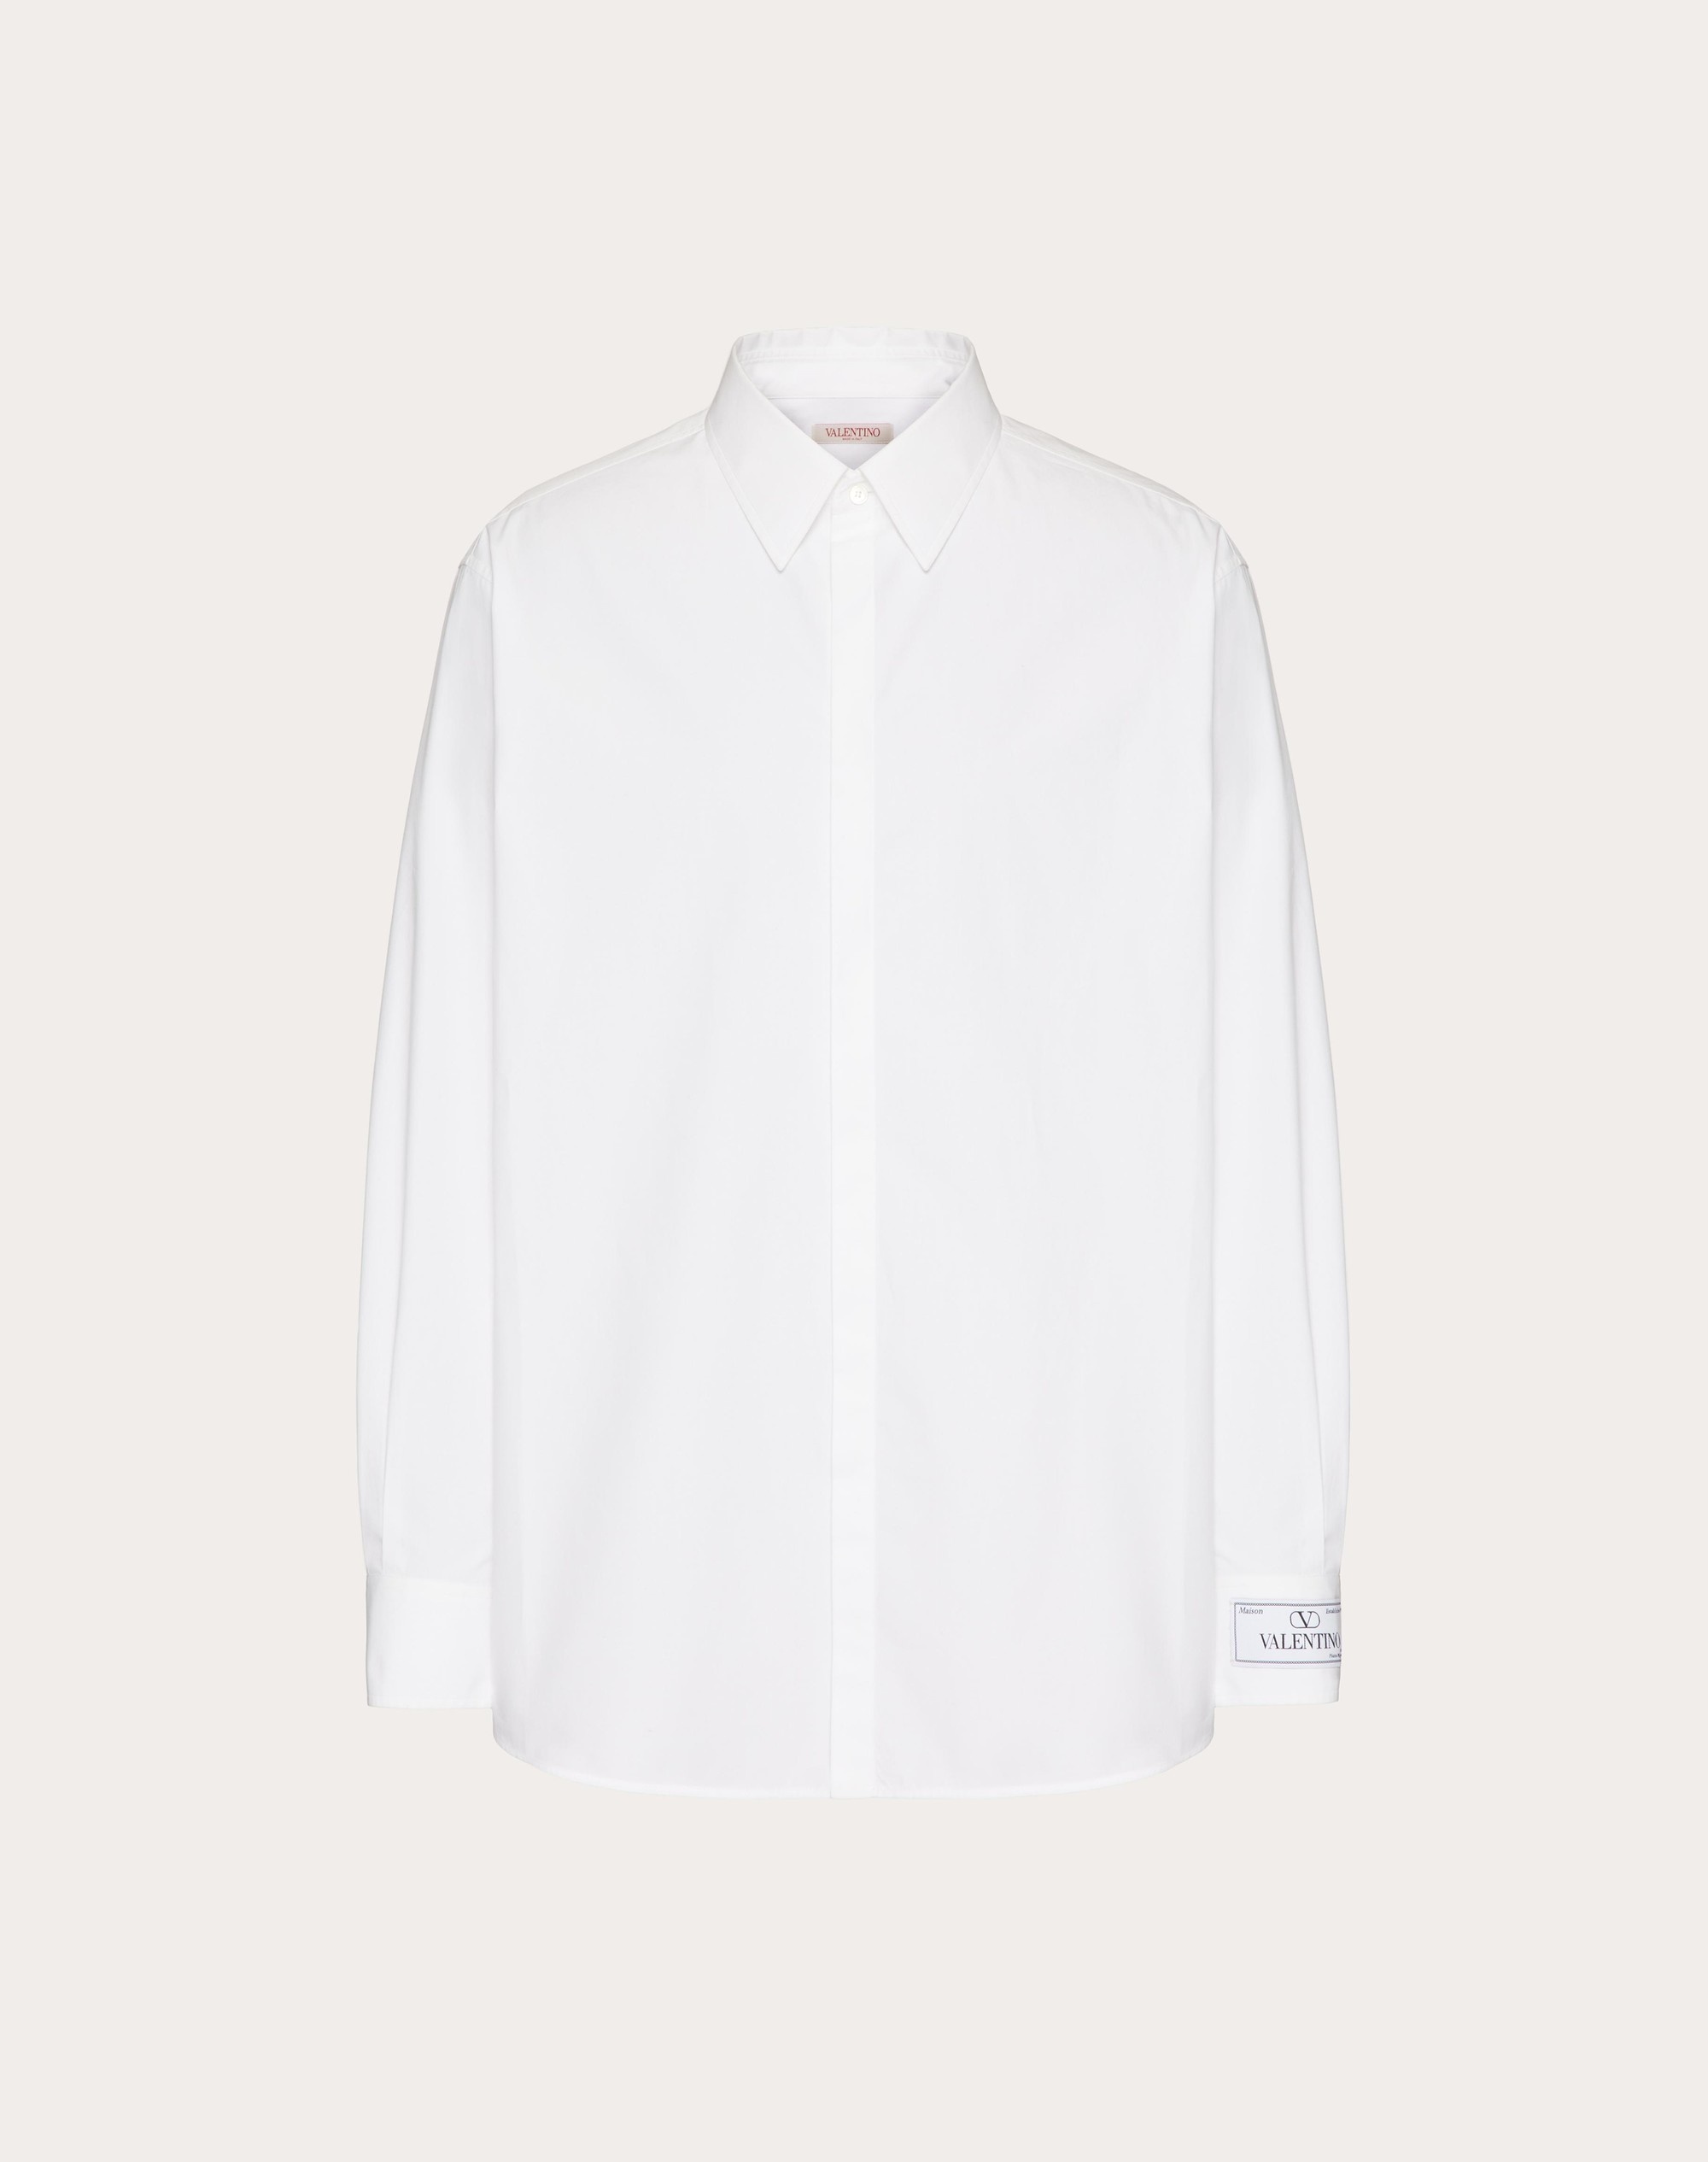 LONG SLEEVE COTTON SHIRT WITH MAISON VALENTINO TAILORING LABEL - 1